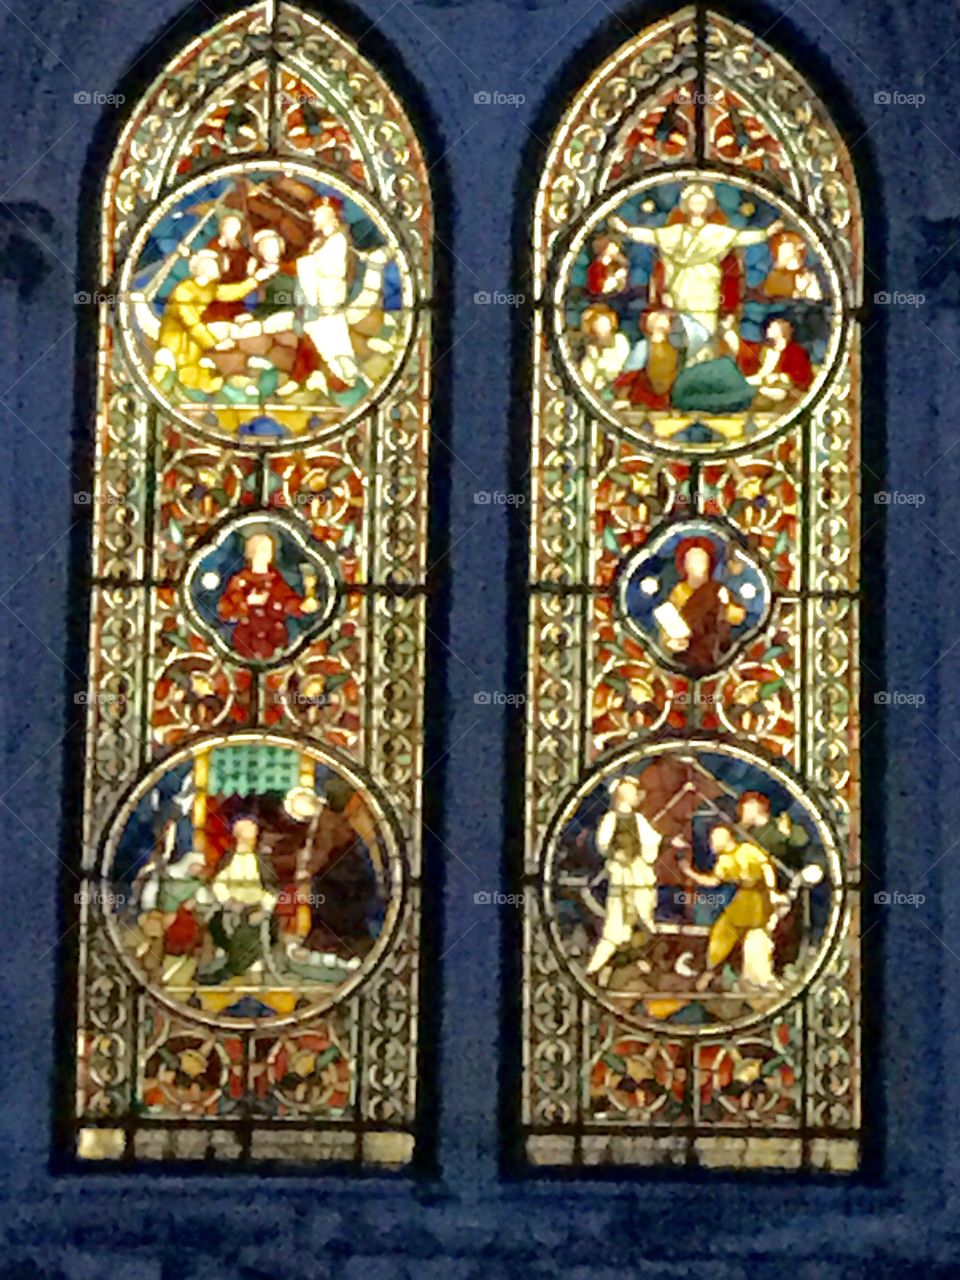 Chichester stained glass